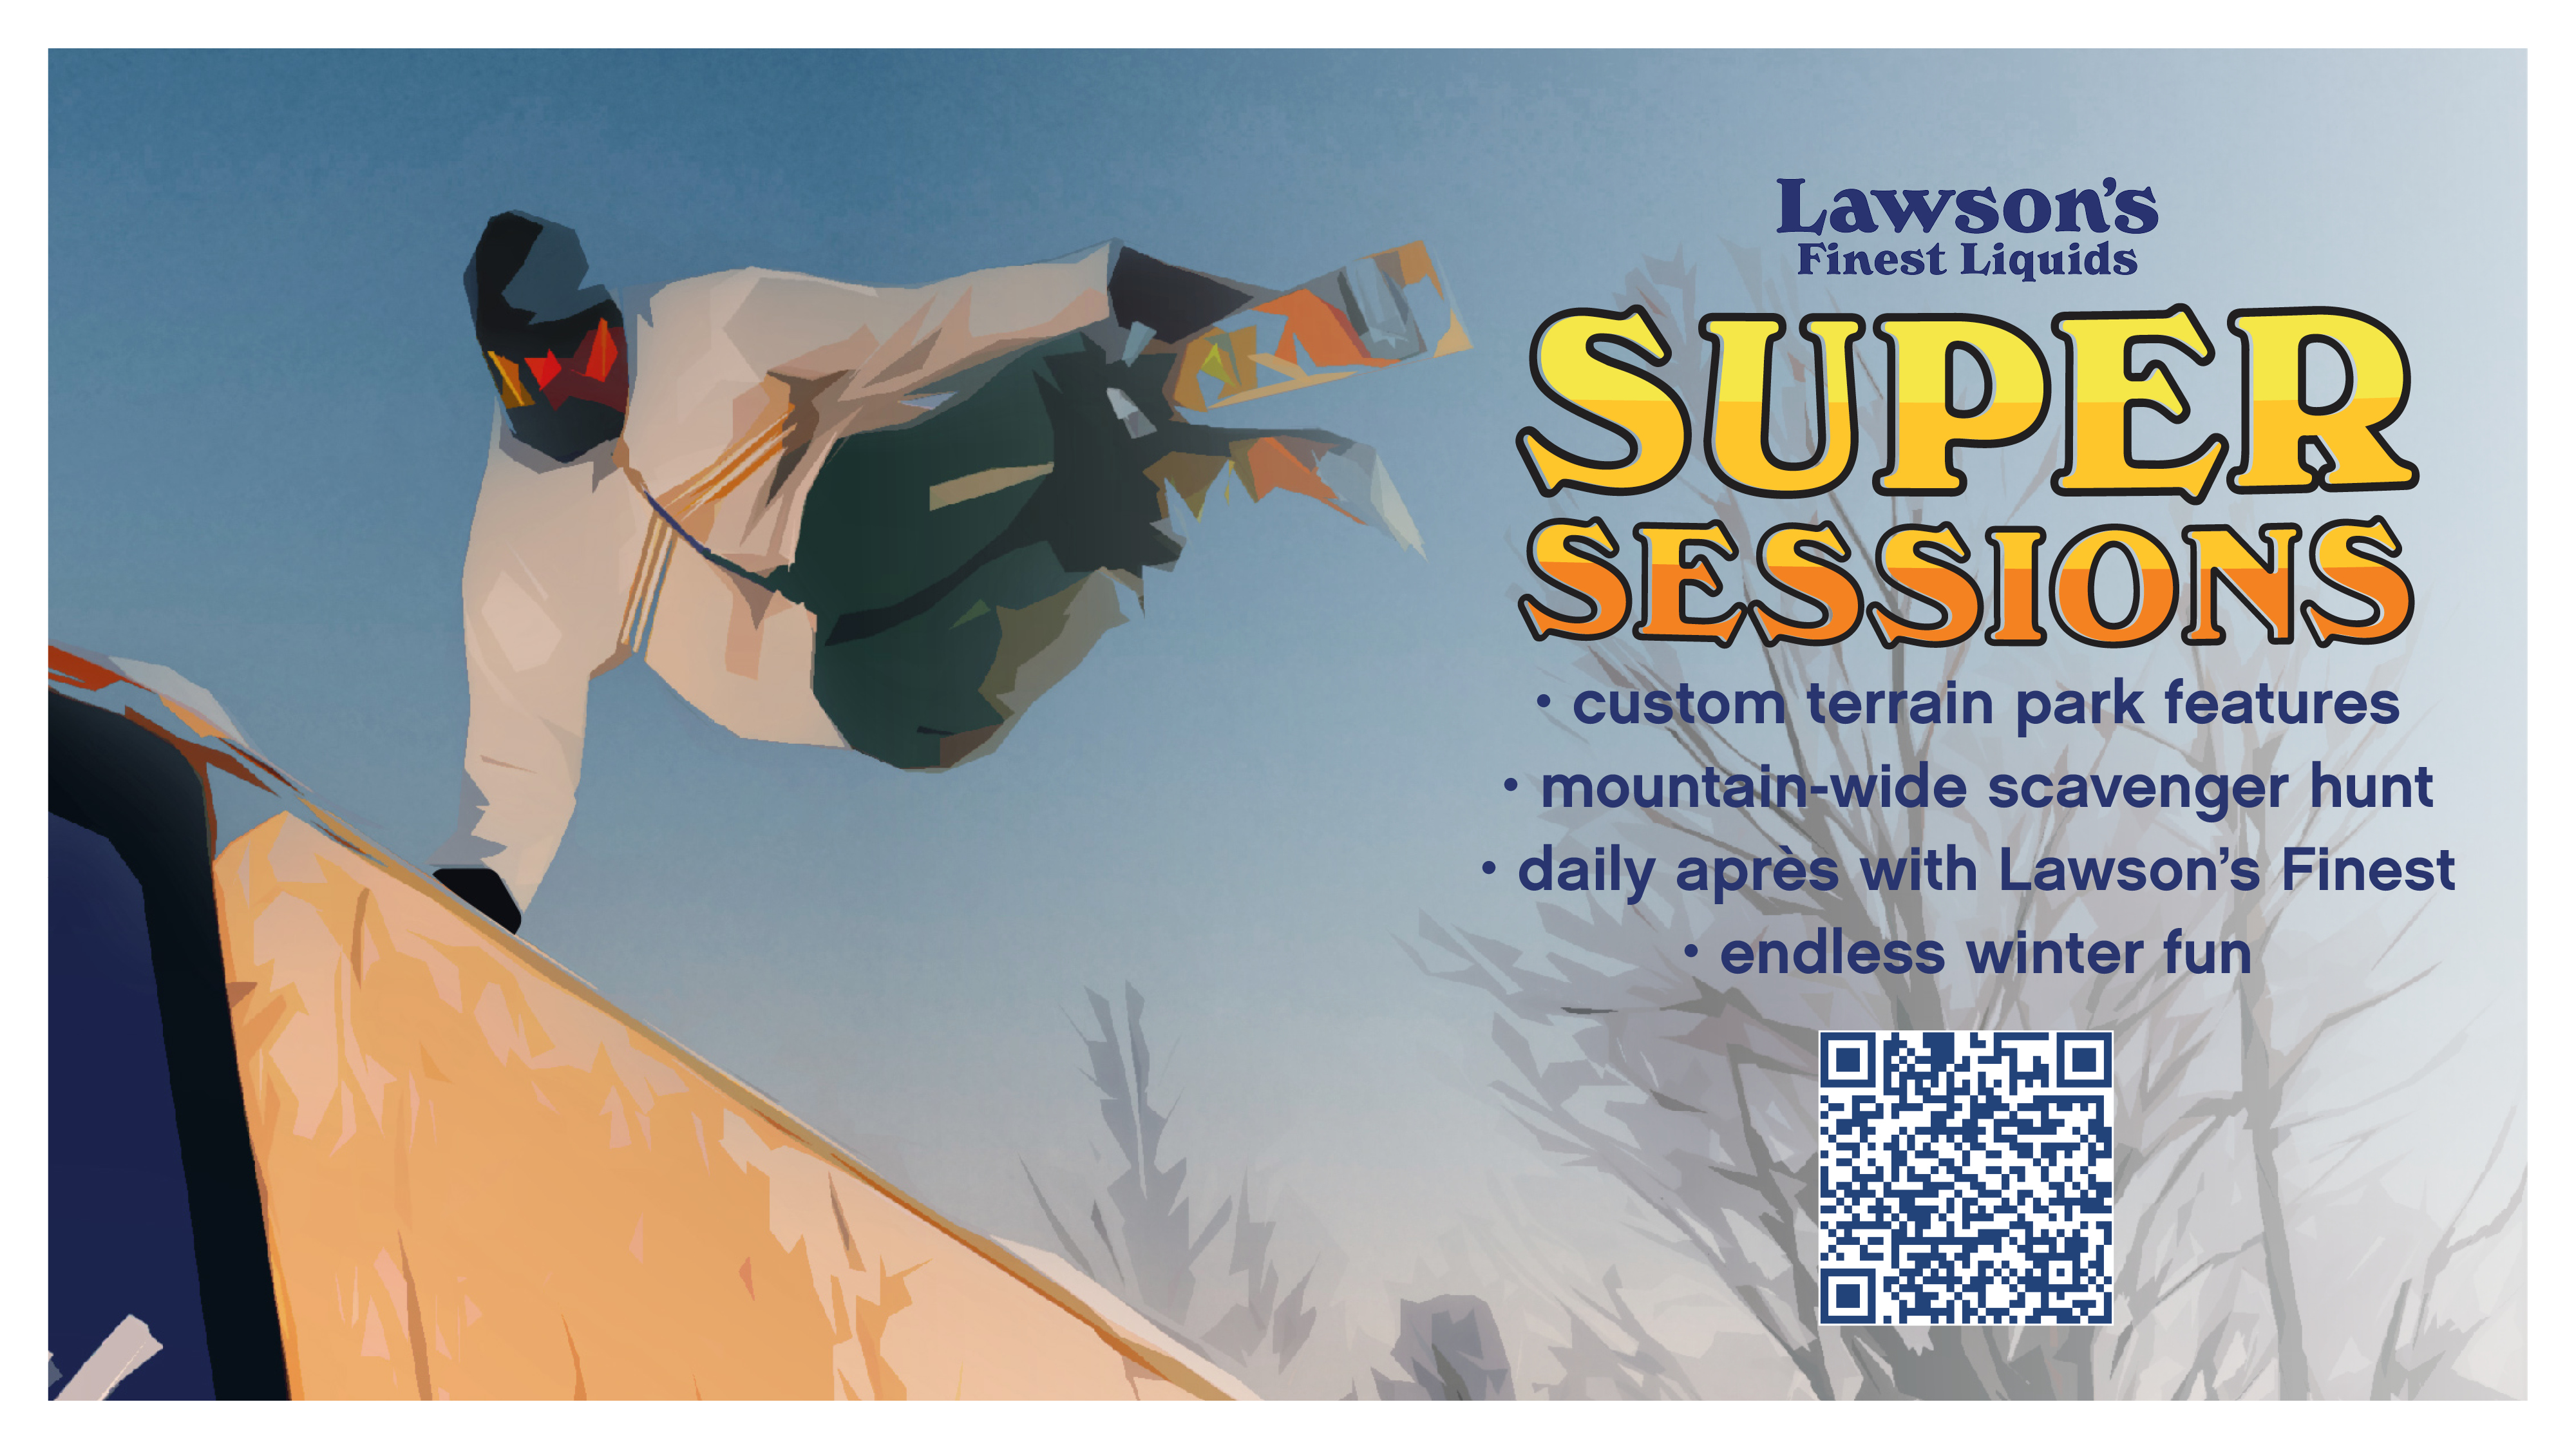 Lawsons Sponsored Terrain park event poster graphic